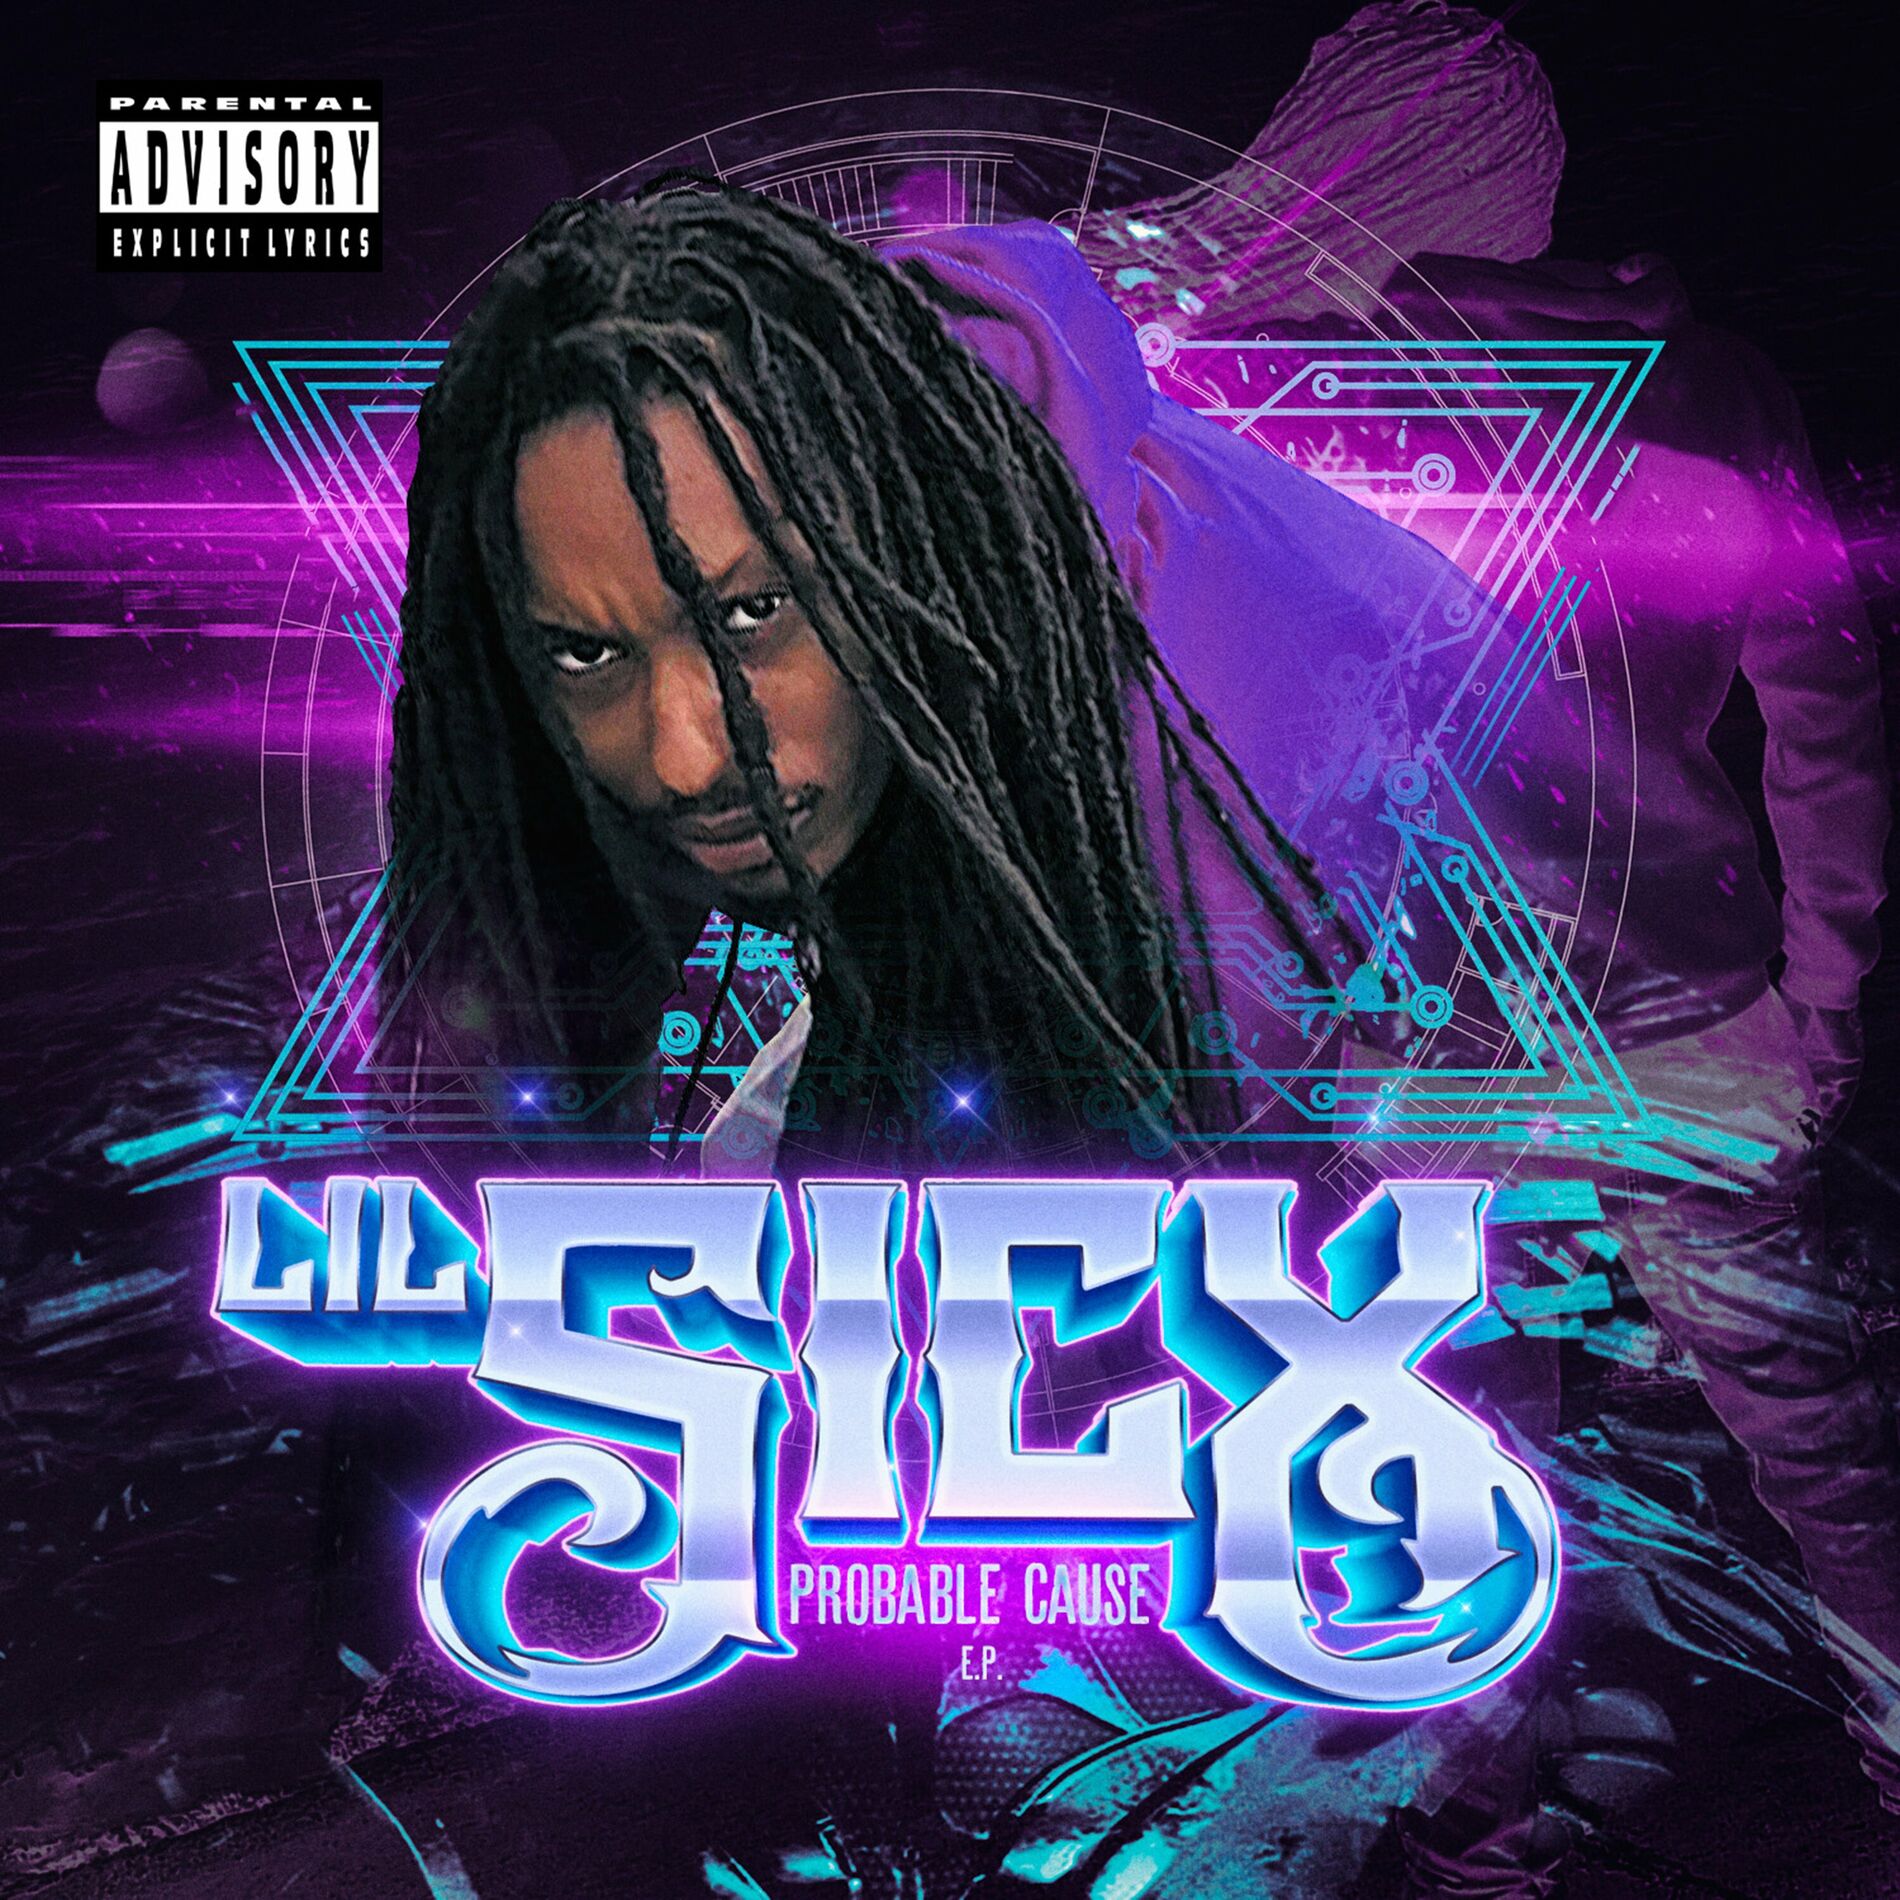 Lil Sicx: albums, songs, playlists | Listen on Deezer